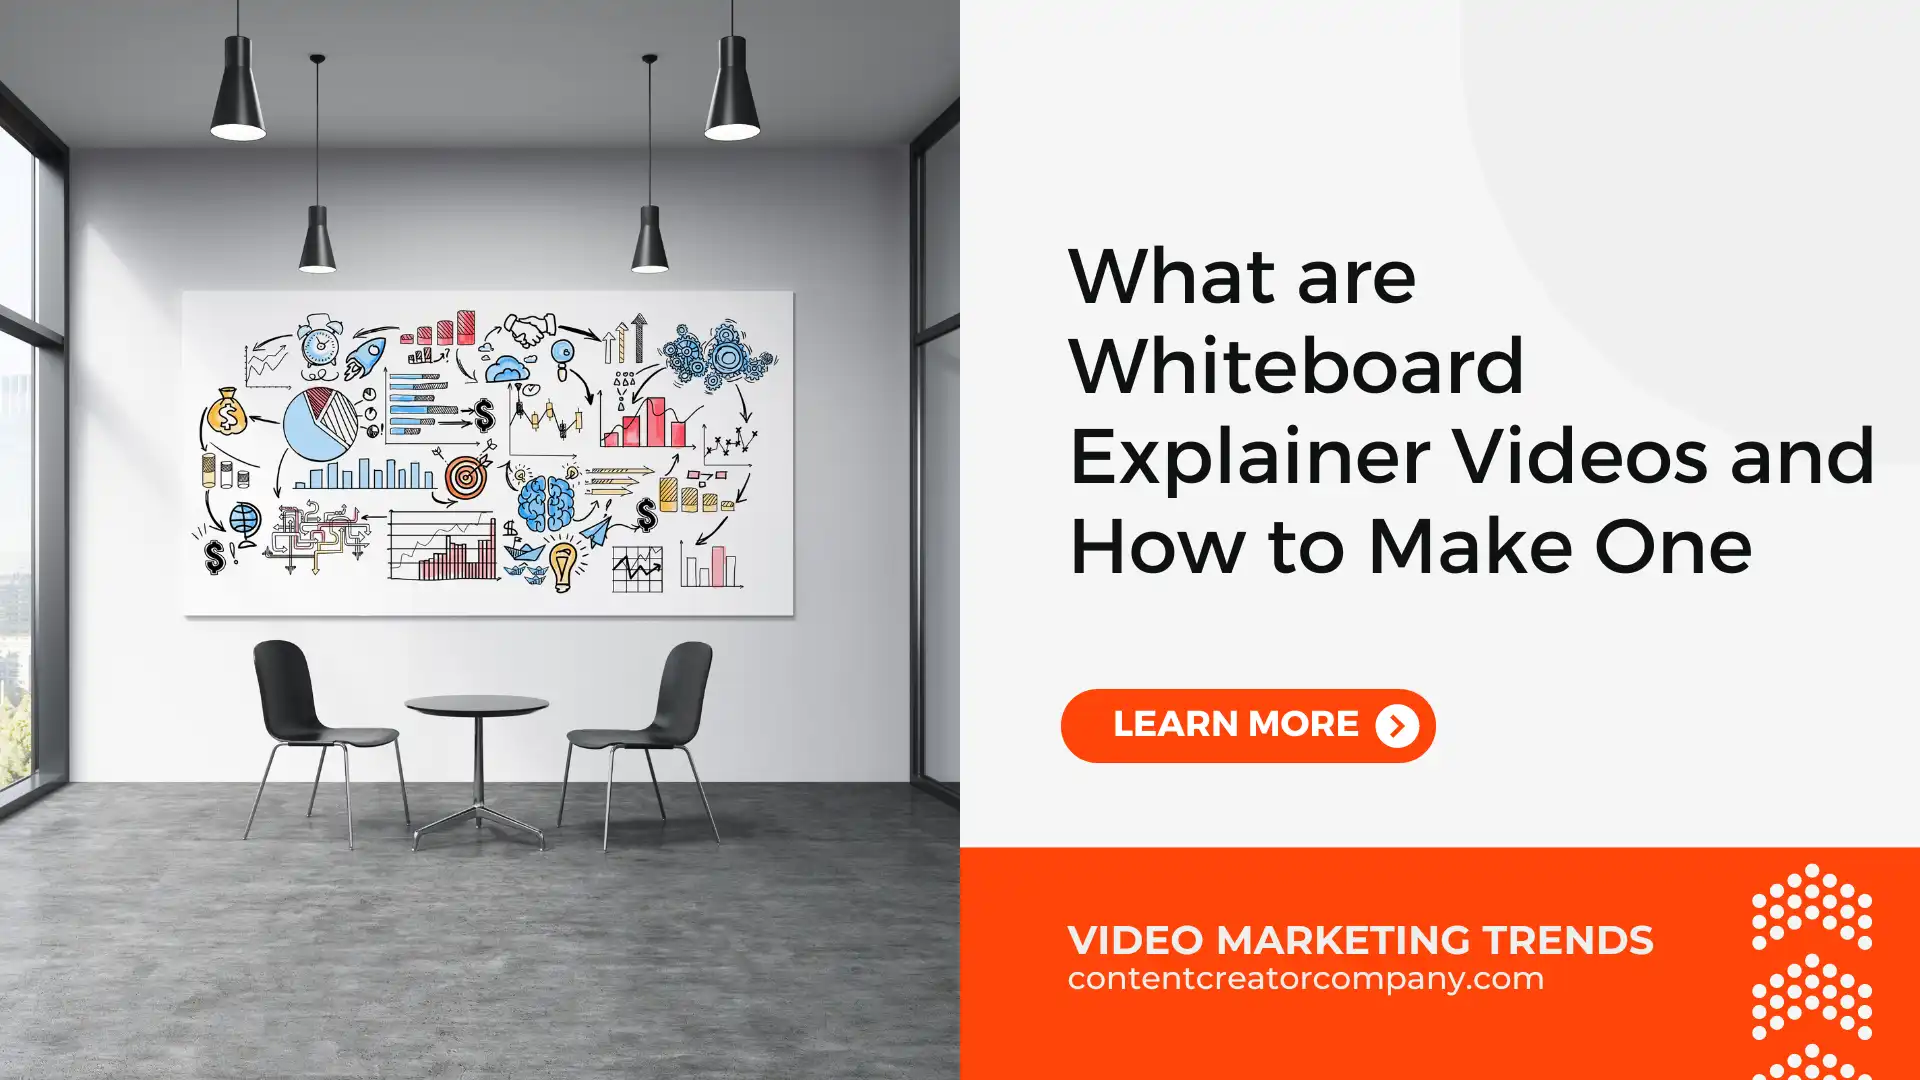 What are Whiteboard Explainer Videos and How to Make One